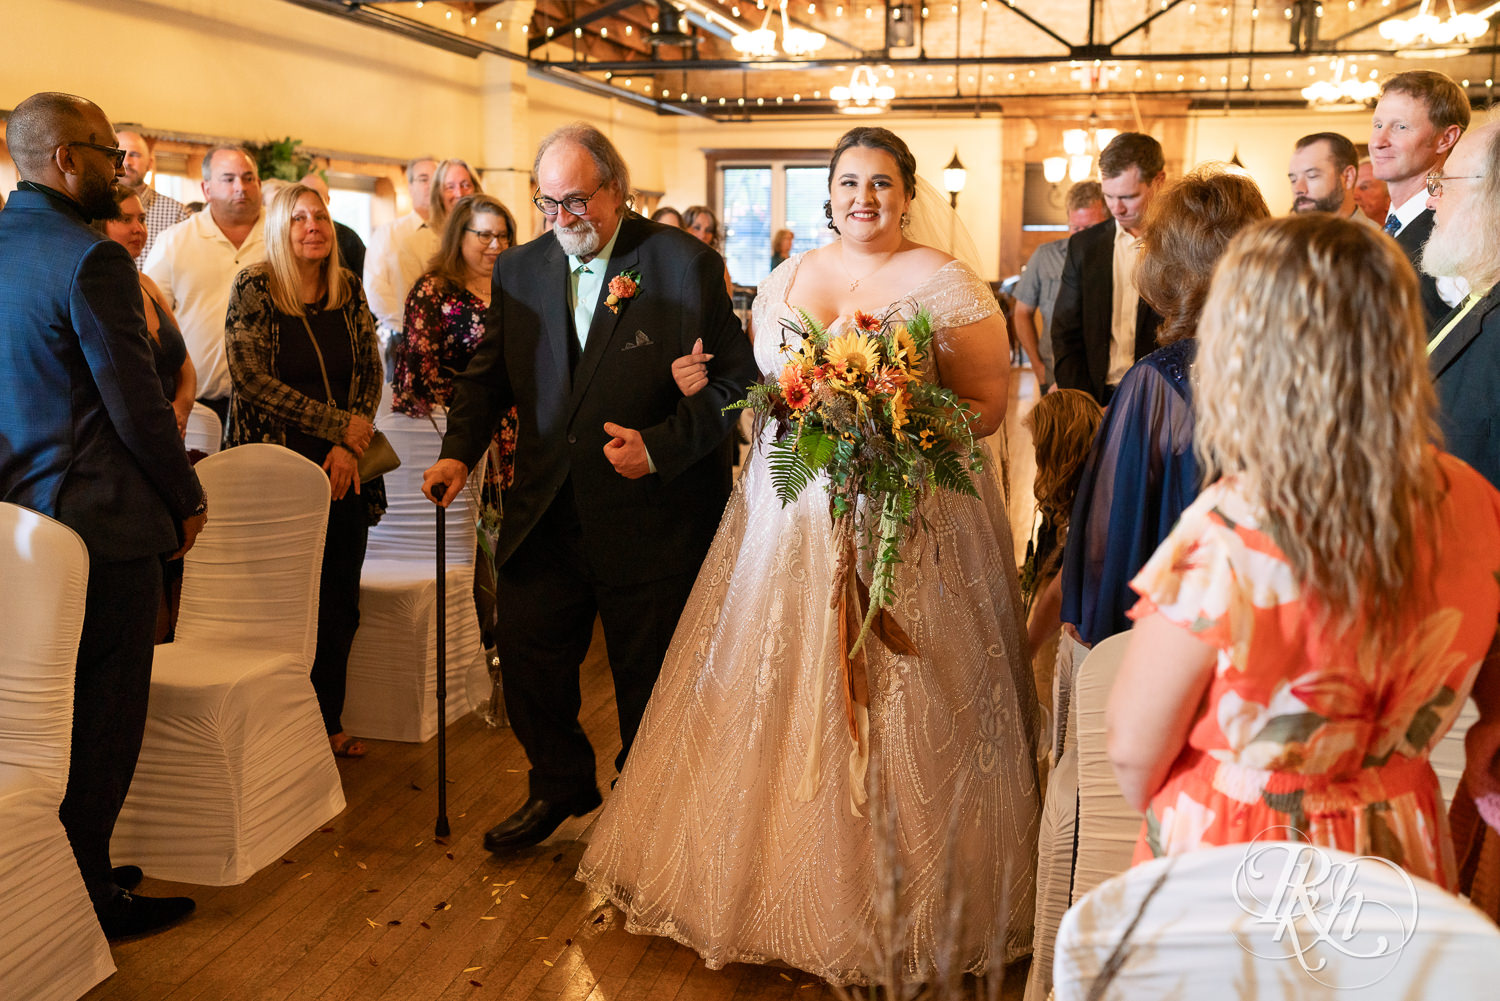 Bride walks down the aisle with her dad at Kellerman's Event Center in White Bear Lake, Minnesota.